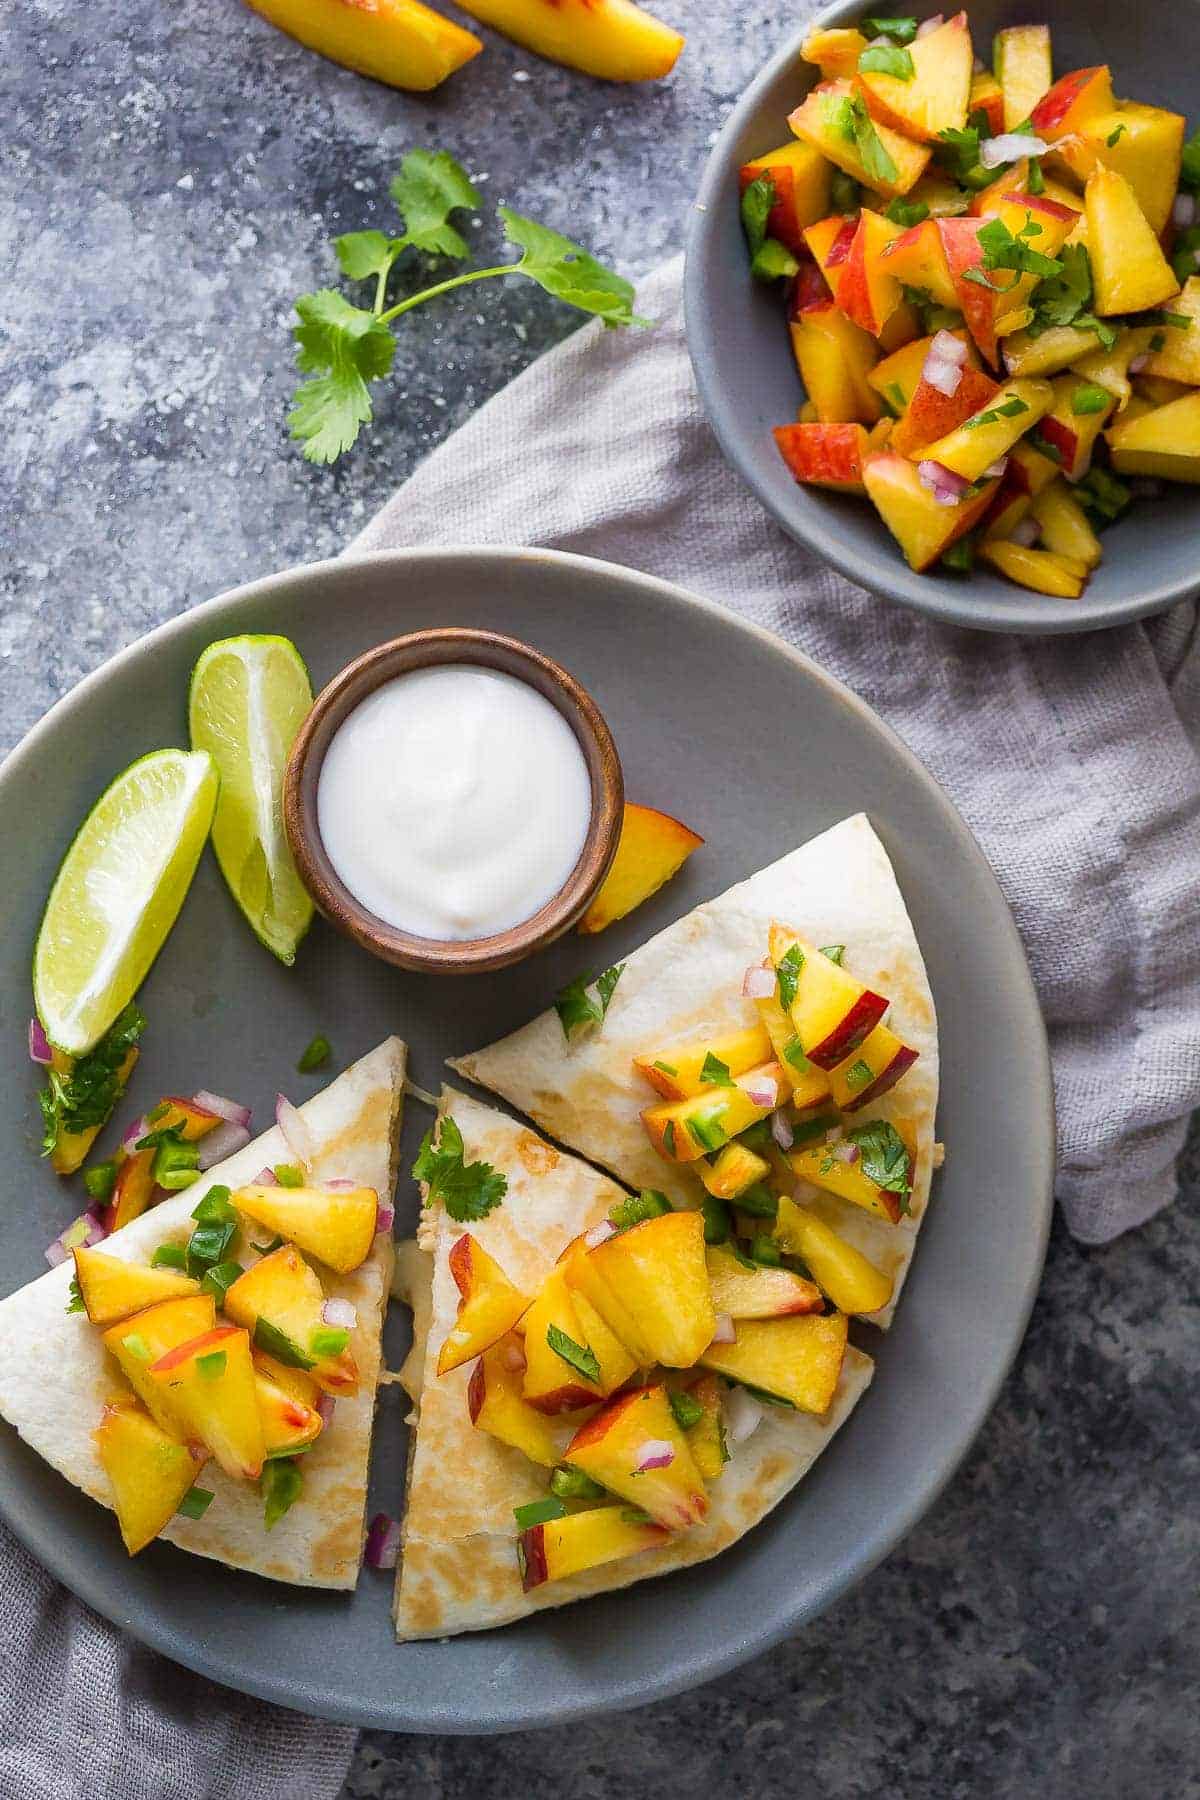 Sweet Chili Chicken Quesadillas with Peach Salsa on a plate with sour cream for dipping